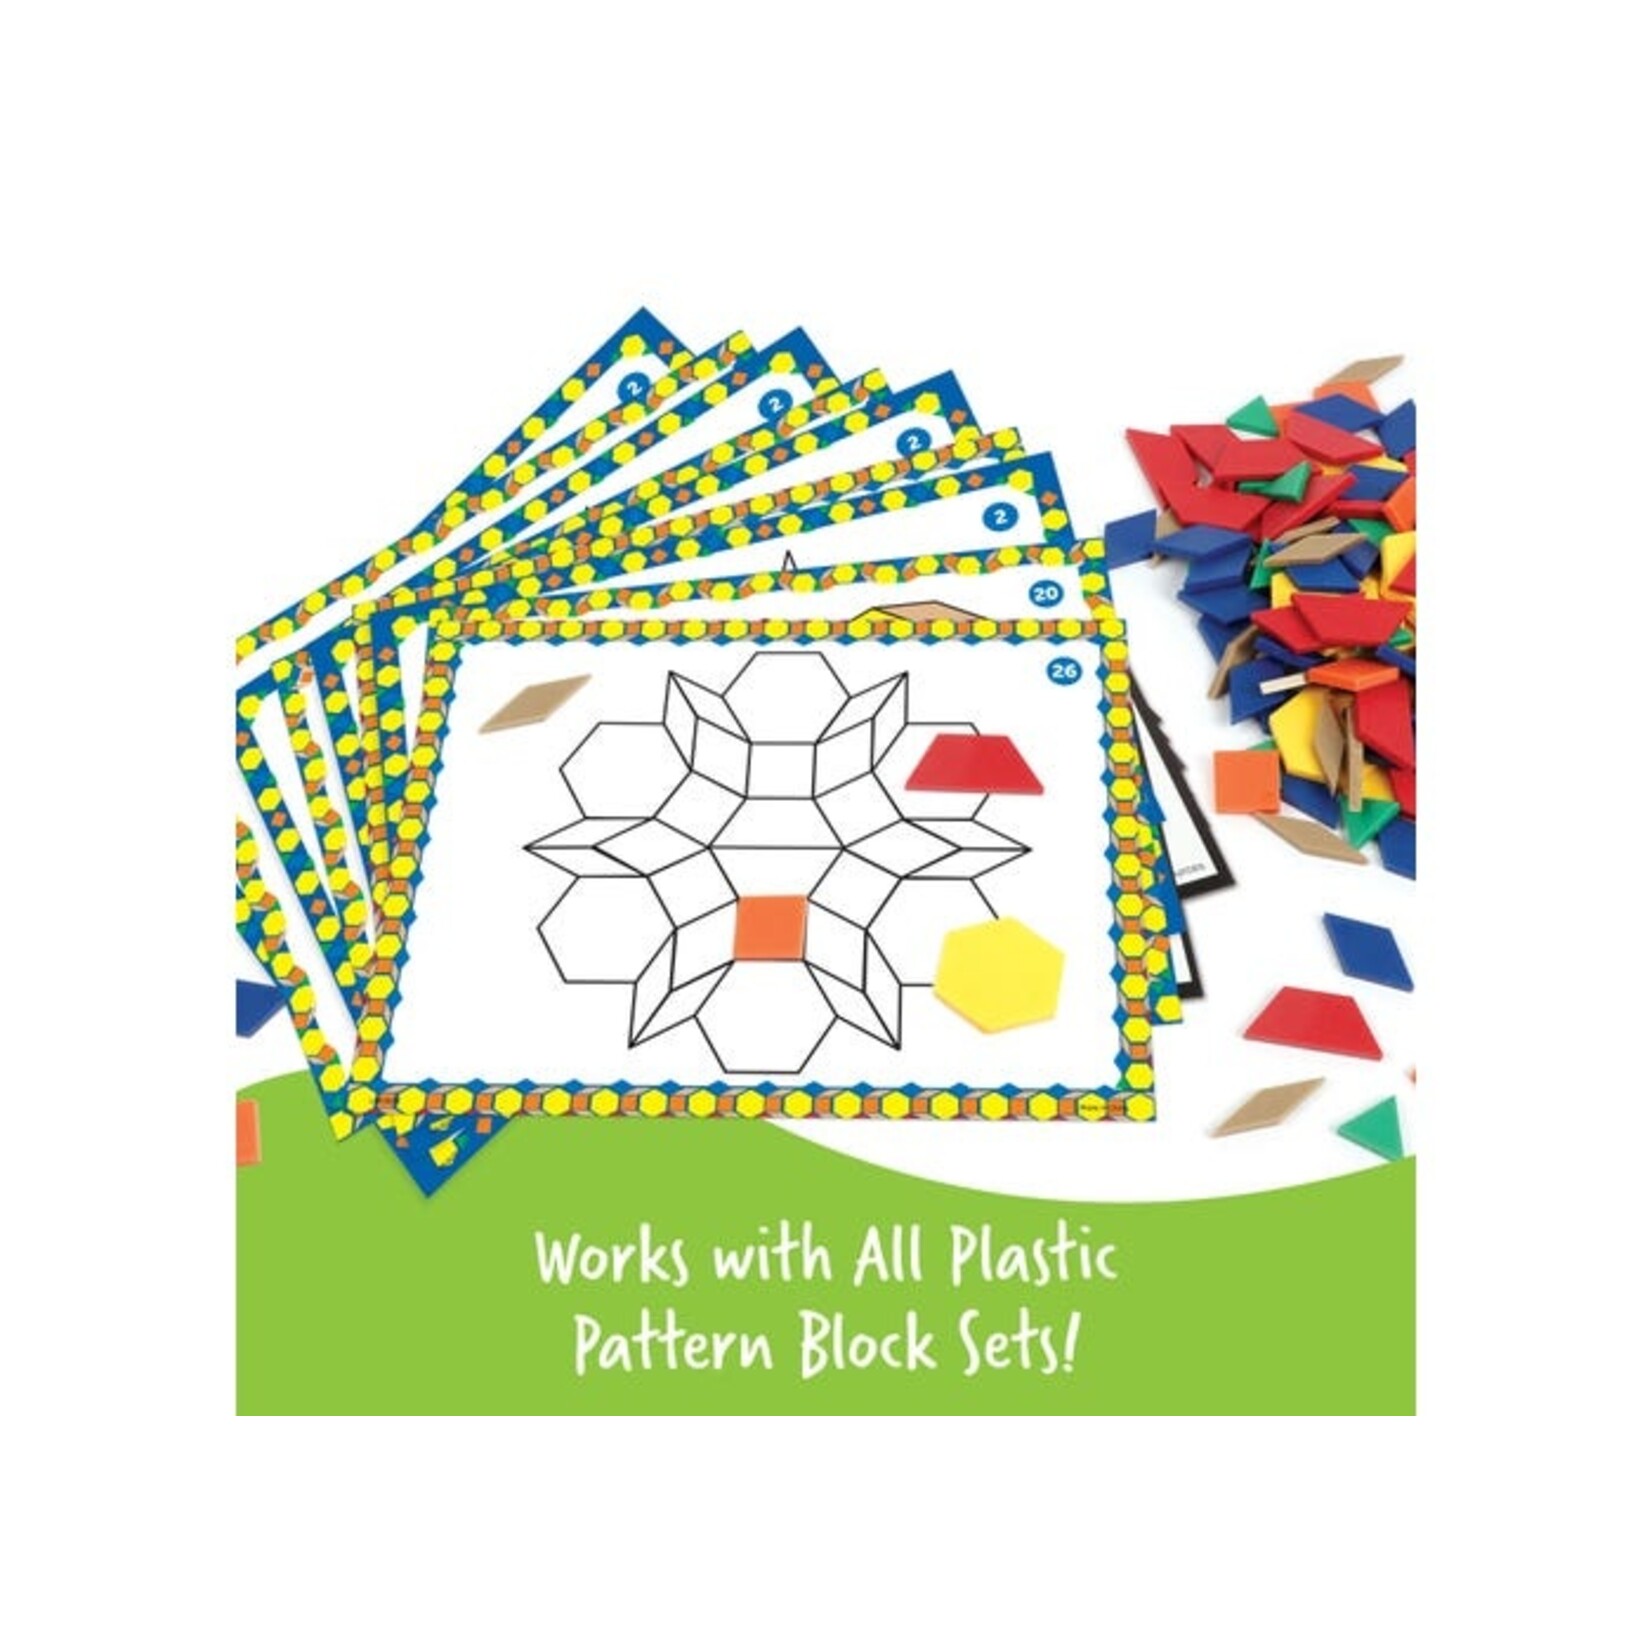 LEARNING RESOURCES INC Pattern Block Design Cards